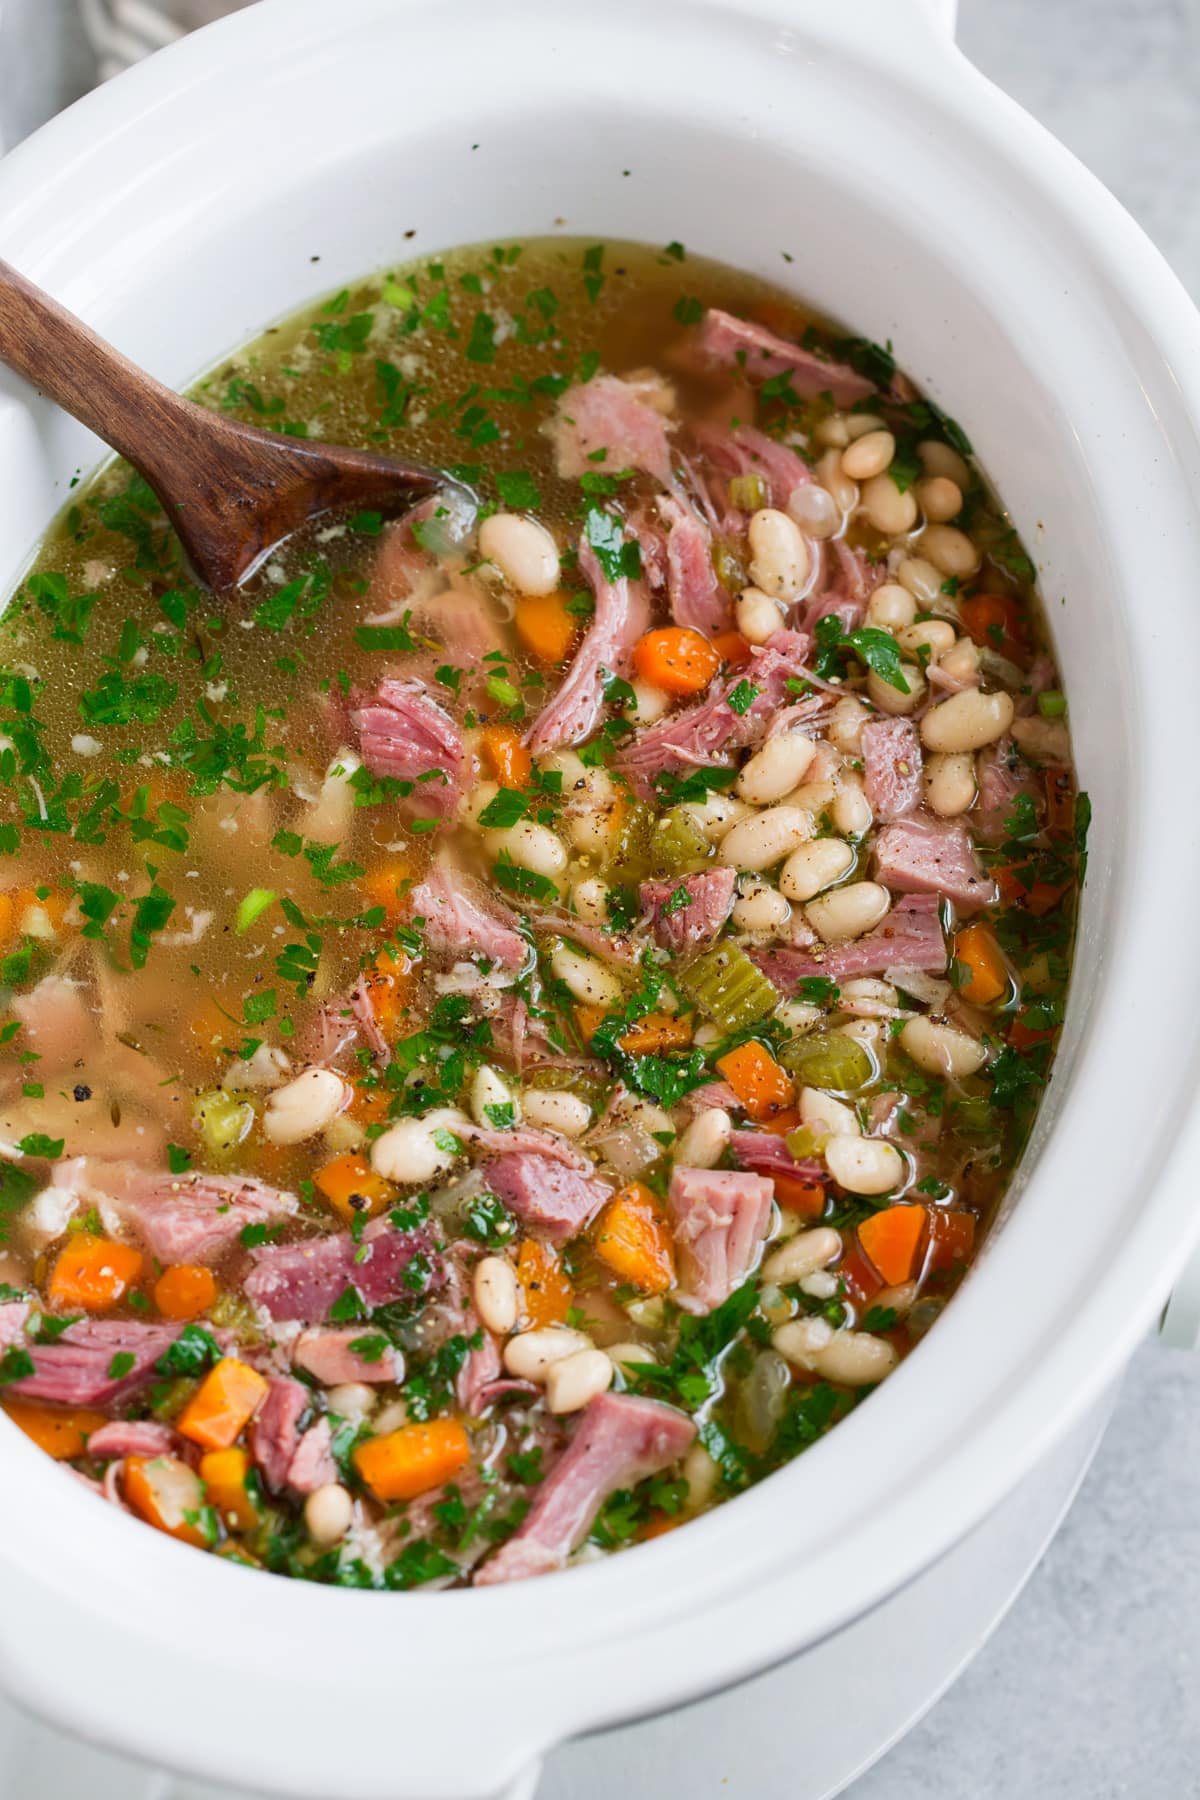 Ham and bean soup shown in a white slow cooker after cooking.